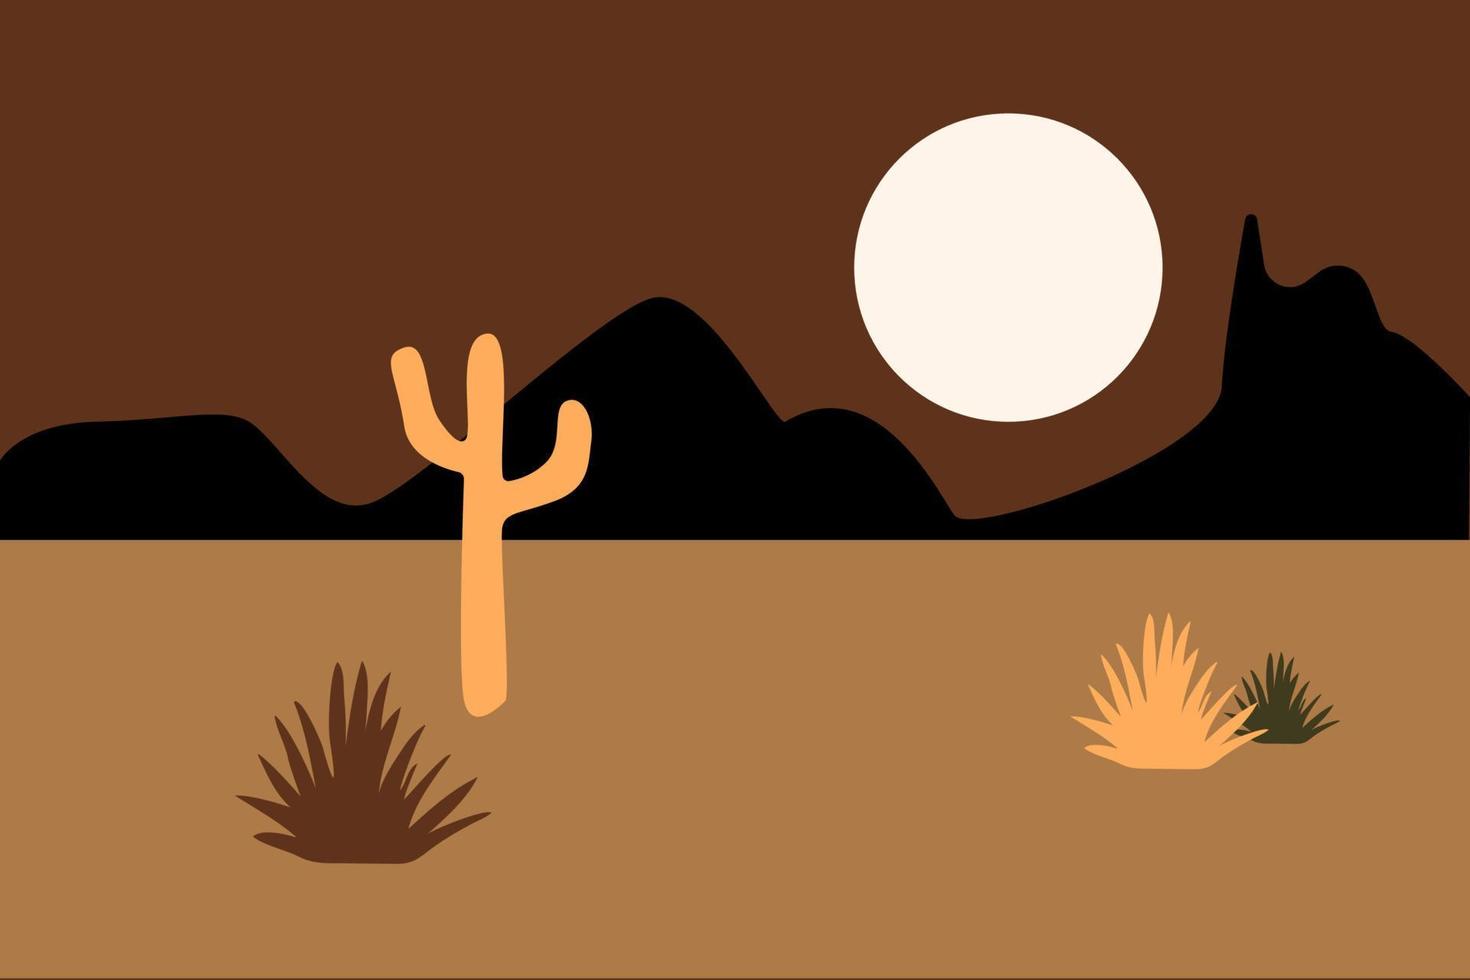 Abstract cactus desert. Color vector flat illustration